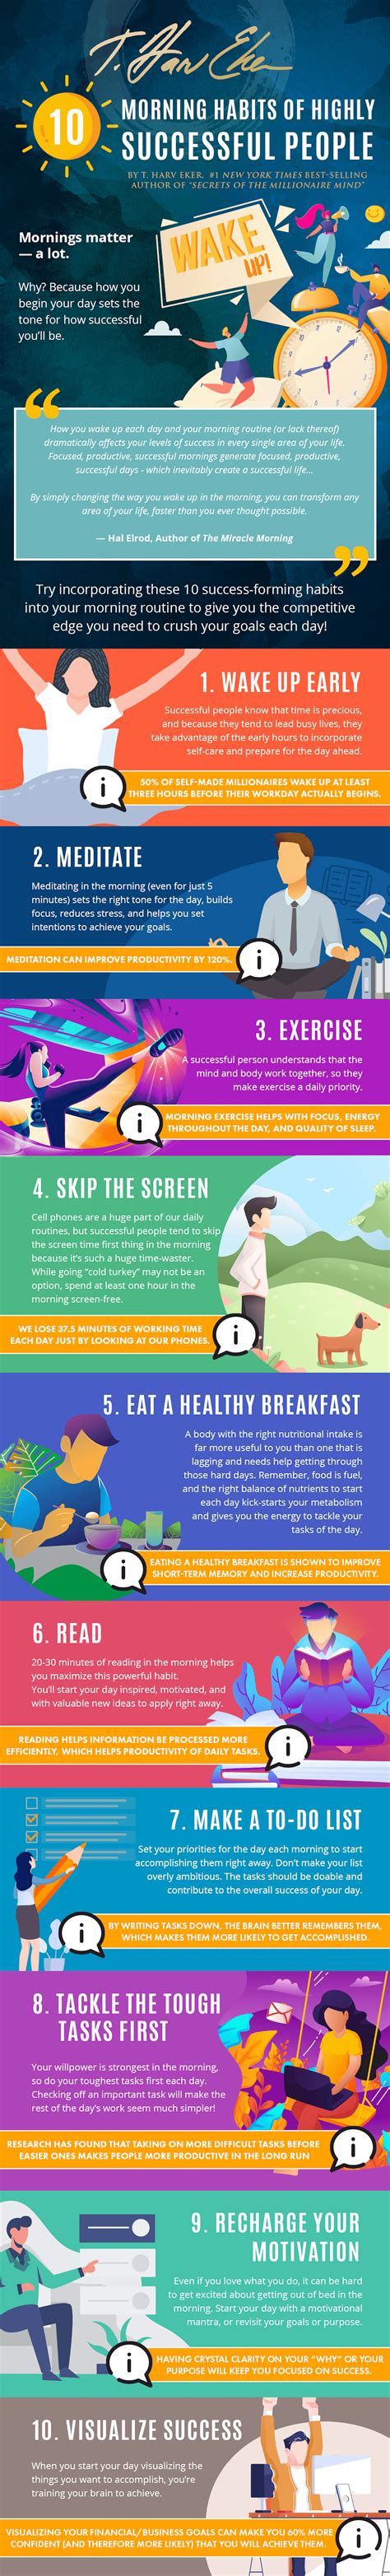 10 Helpful Morning Habits of Successful People That Work - Millionaire ...